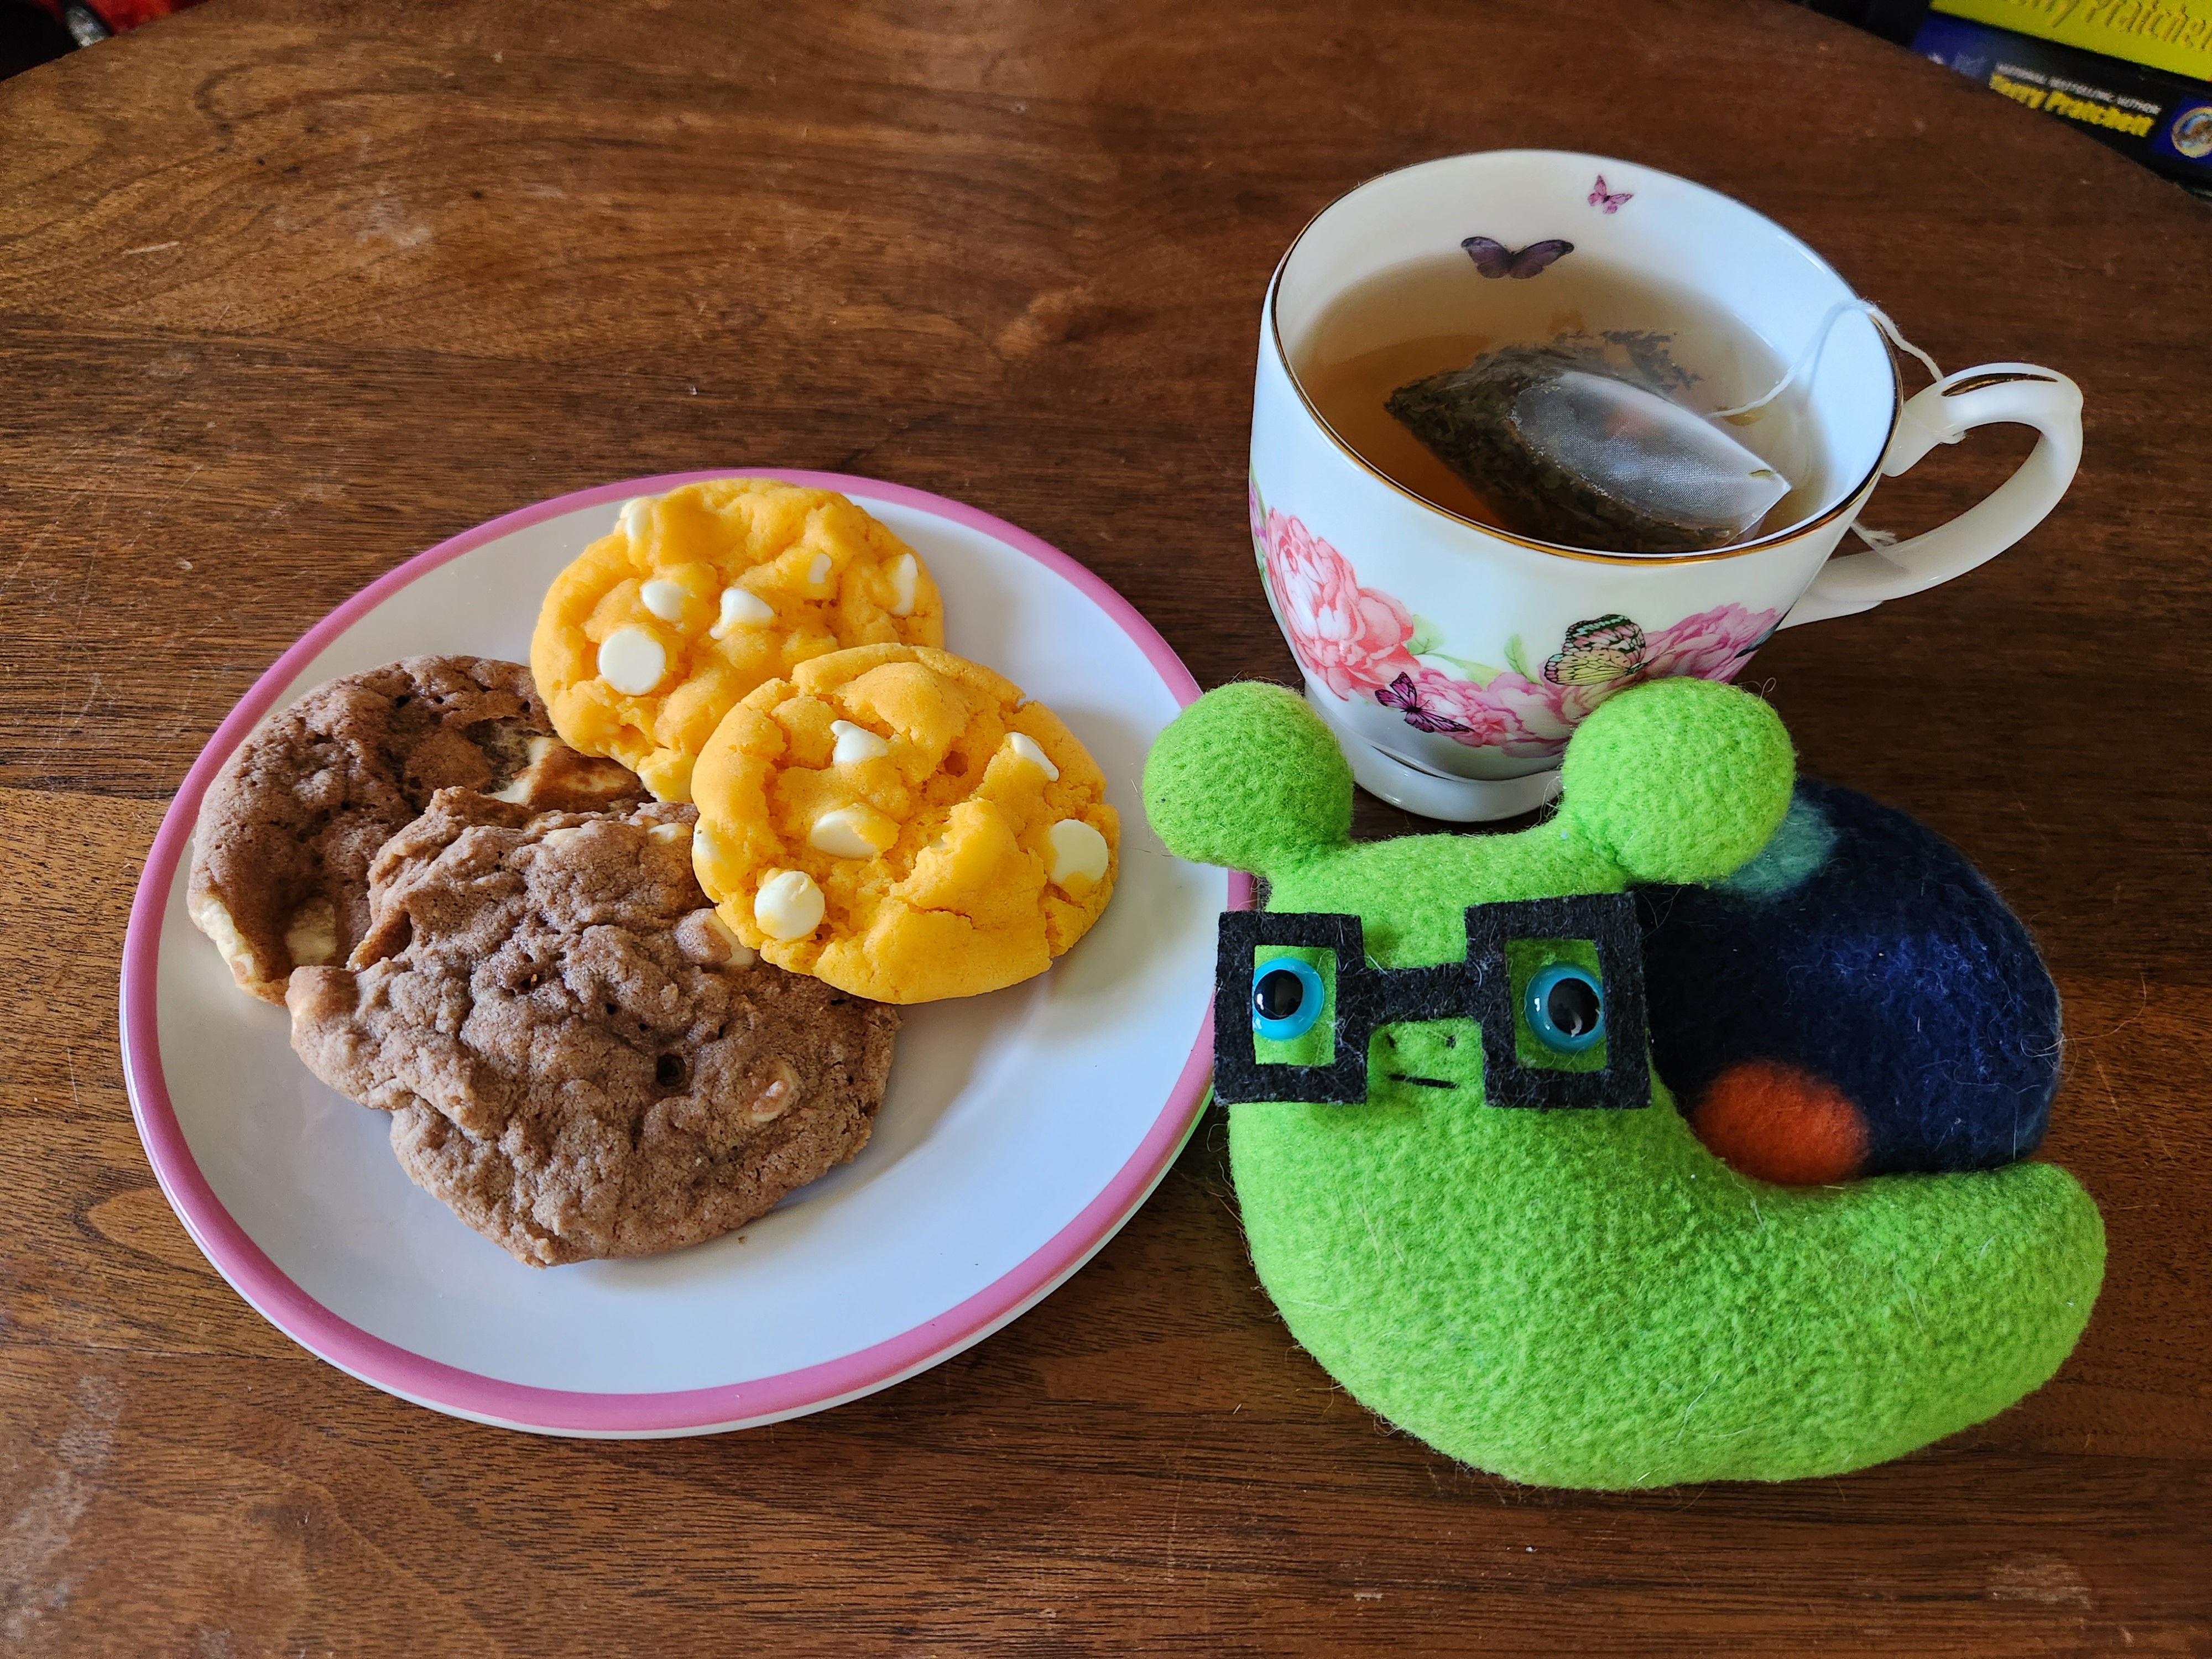 a plate of four cookies, two orange and two chocolate, sit on a wooden table with a cup of tea brewing and a little plush JimBob Snail